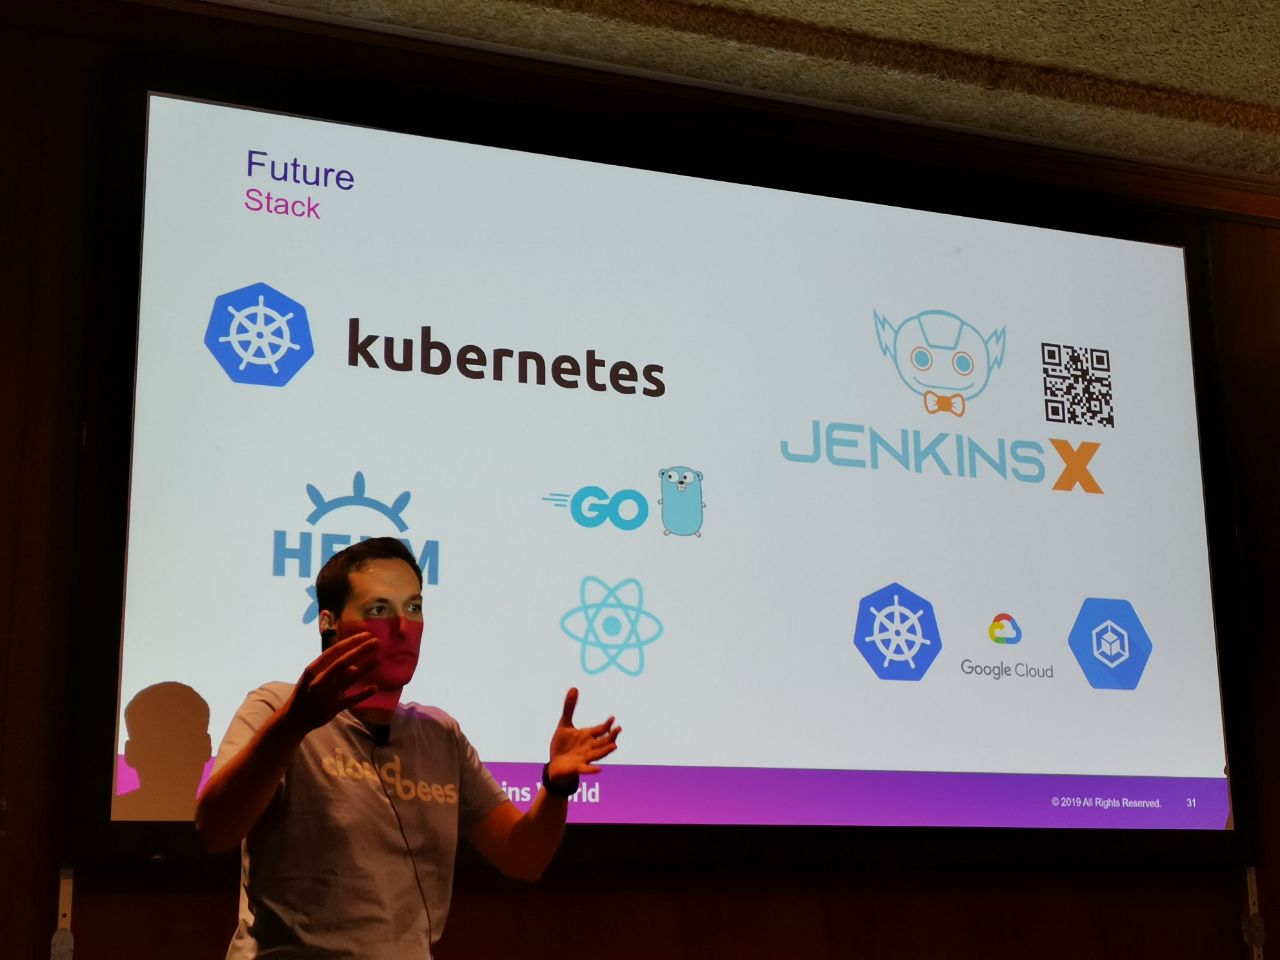 Picture taken during the presentation at DWJW 2019. I'm showing the tech stack of the new CloudBees' training platform